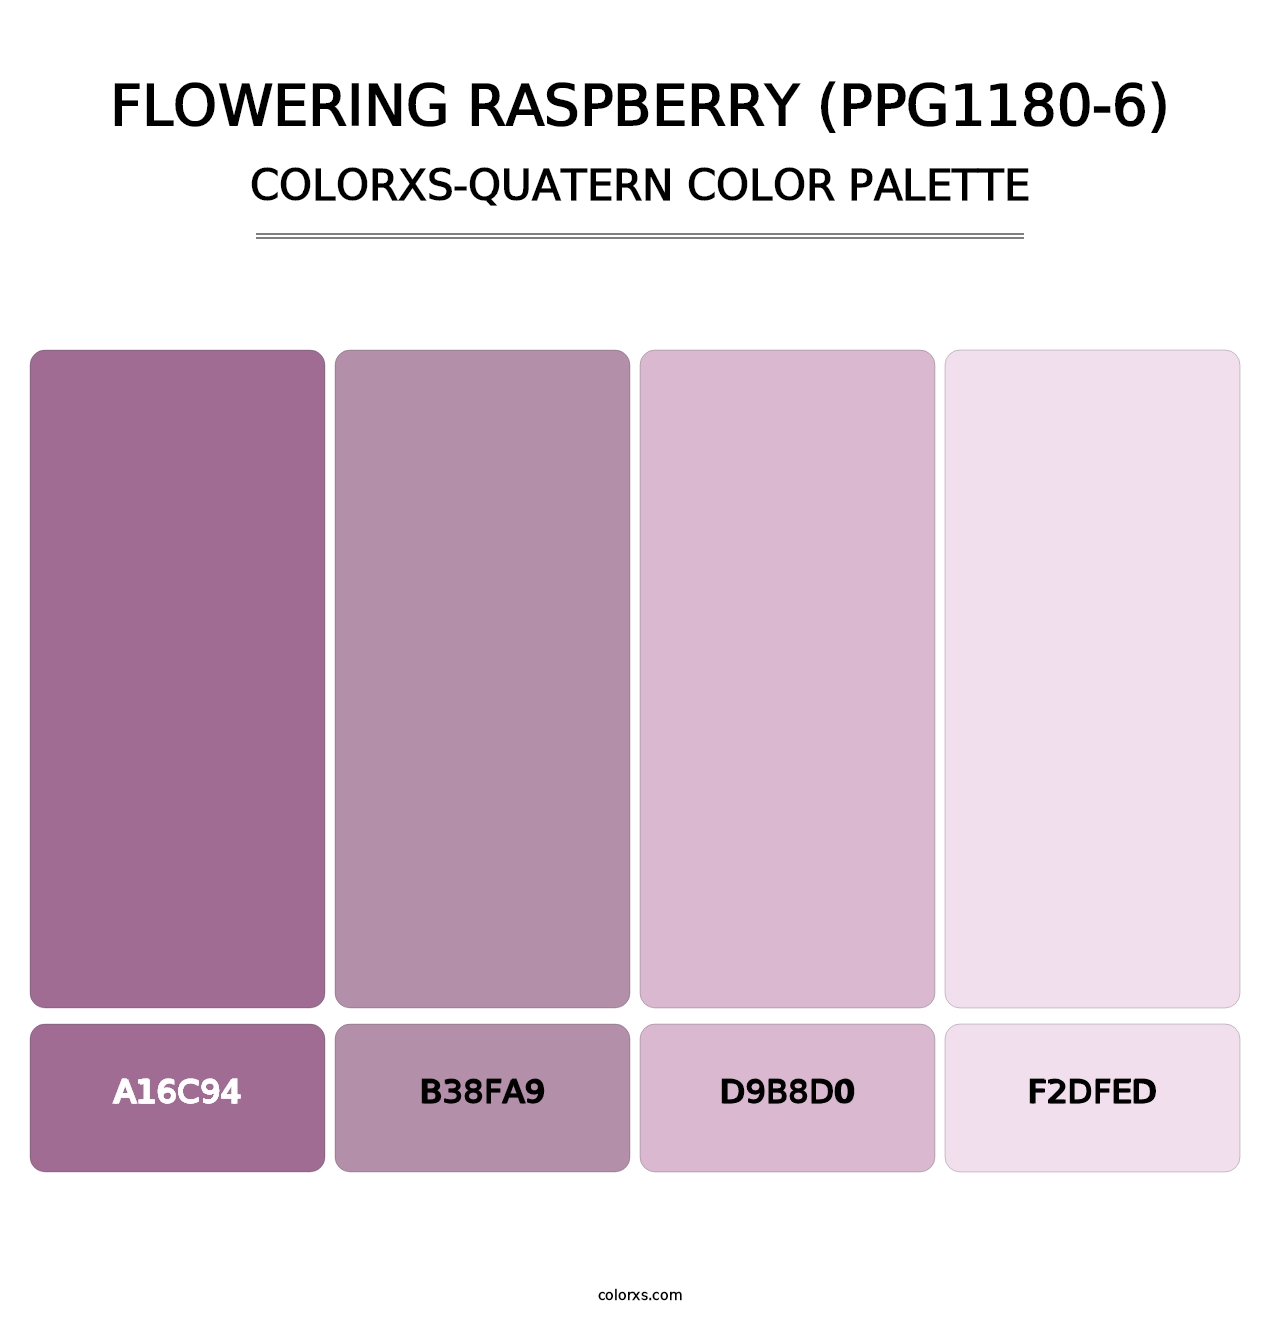 Flowering Raspberry (PPG1180-6) - Colorxs Quatern Palette